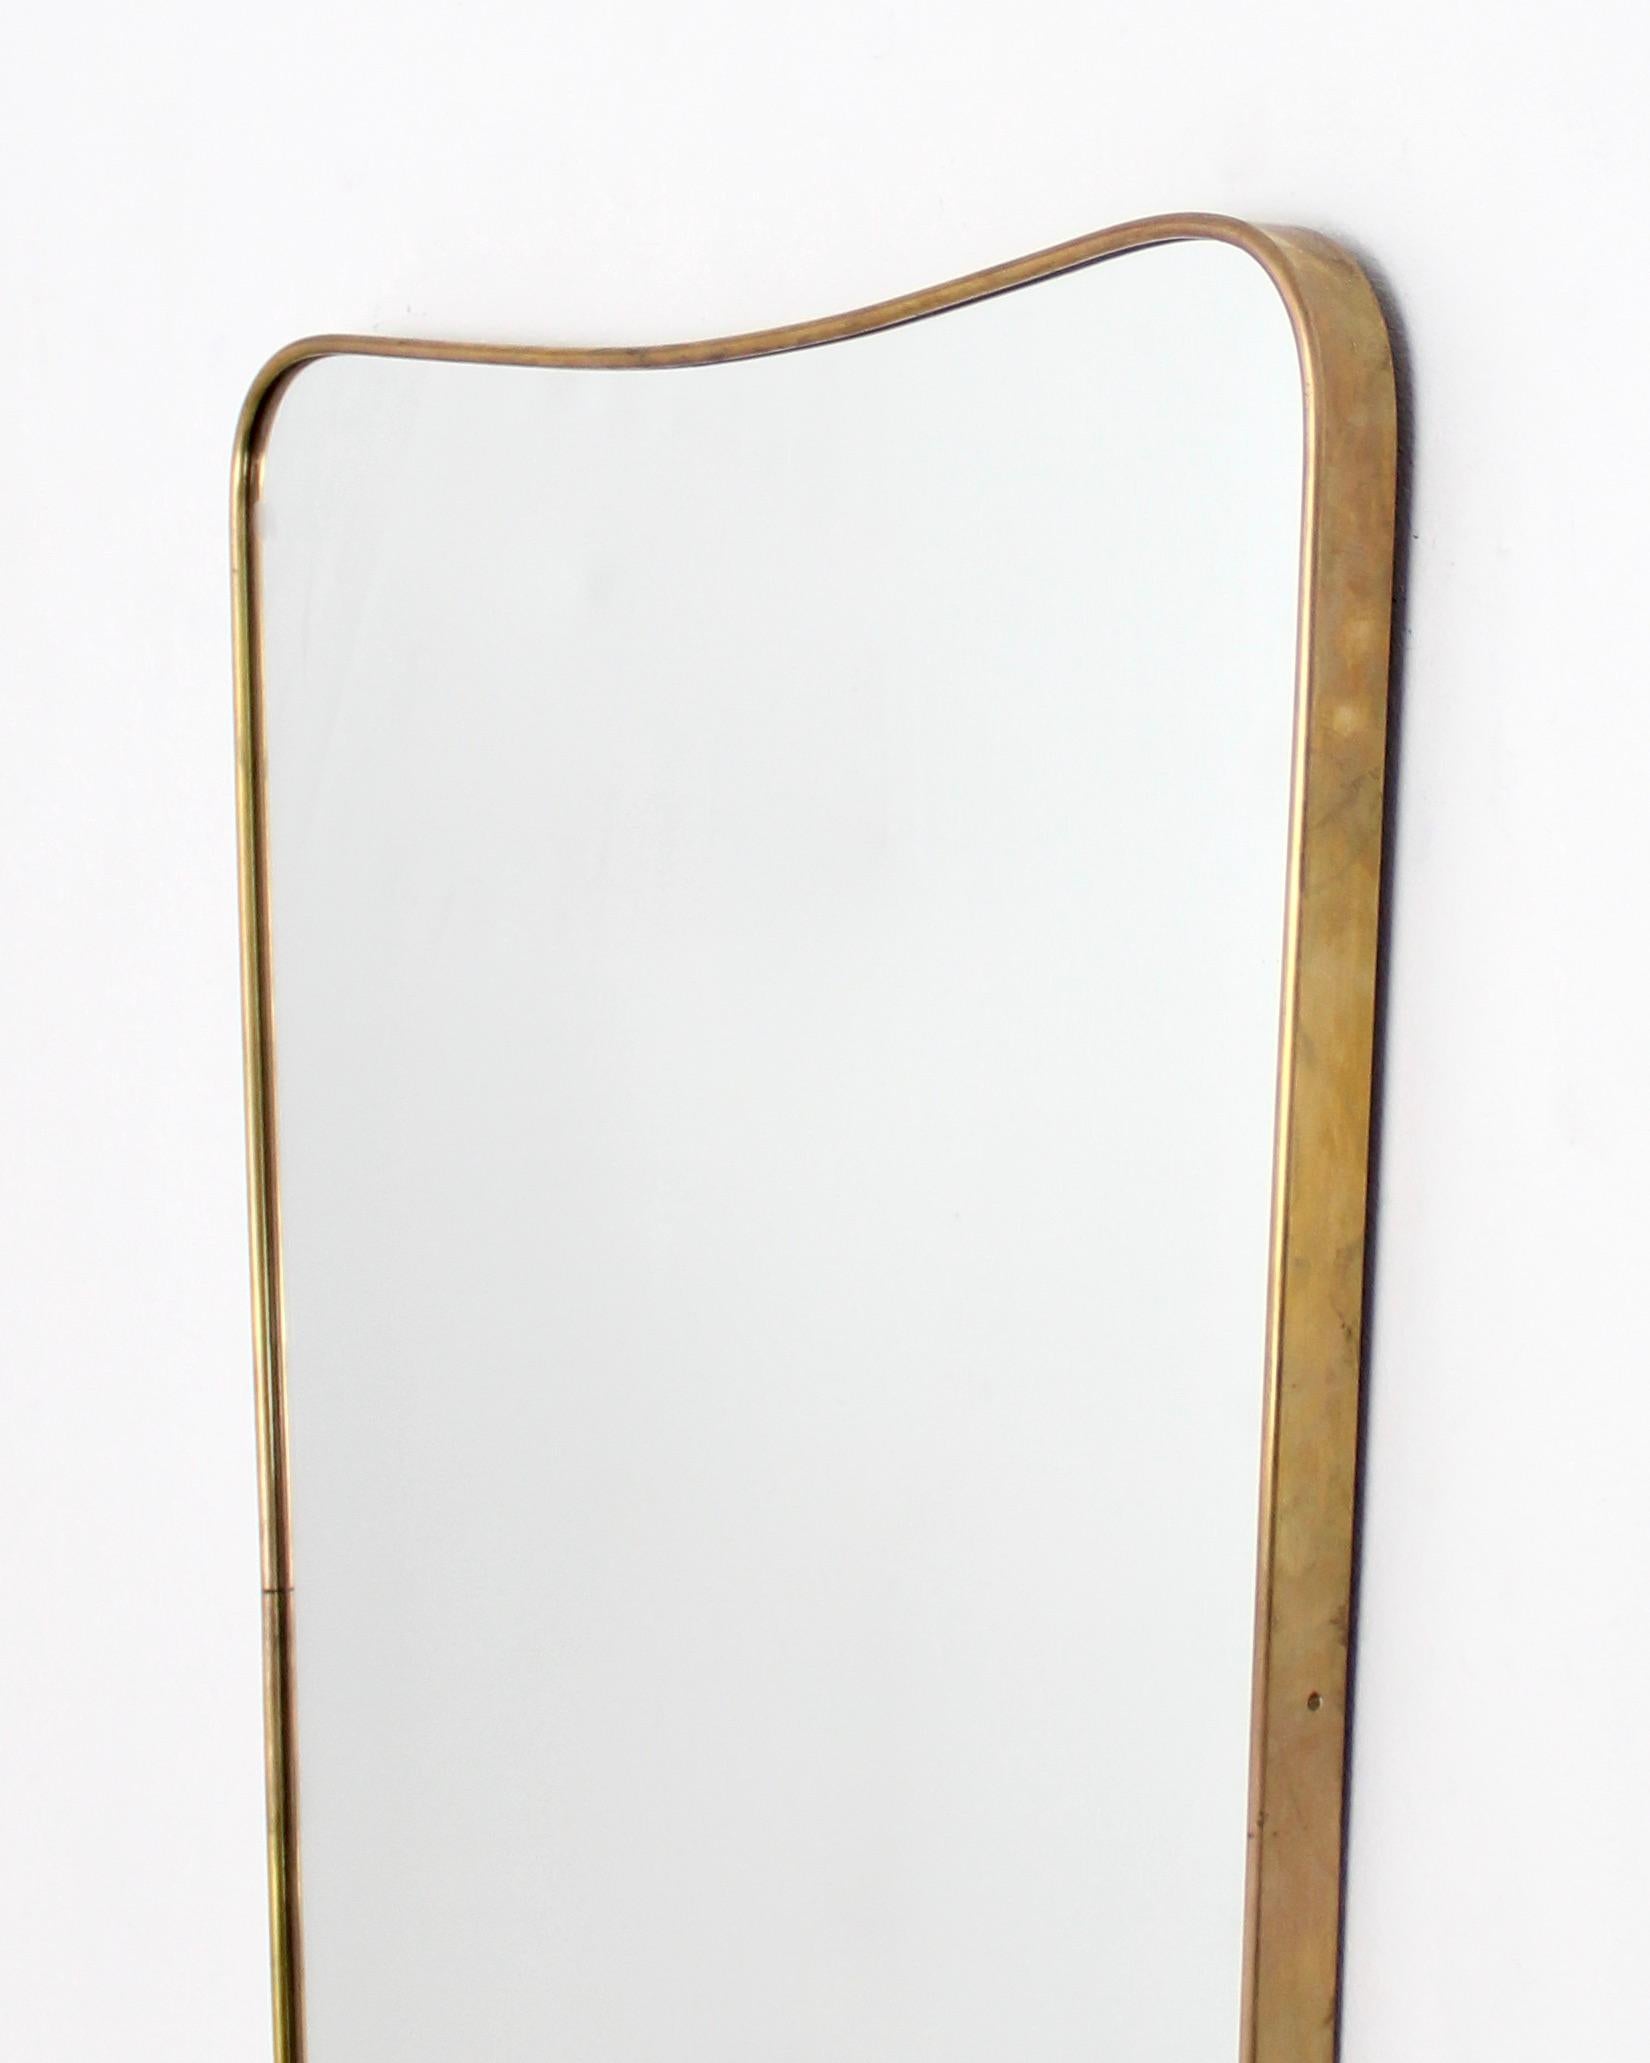 Mid-20th Century Italian Brass Framed Curved Top Vintage Shield Shaped Mirror